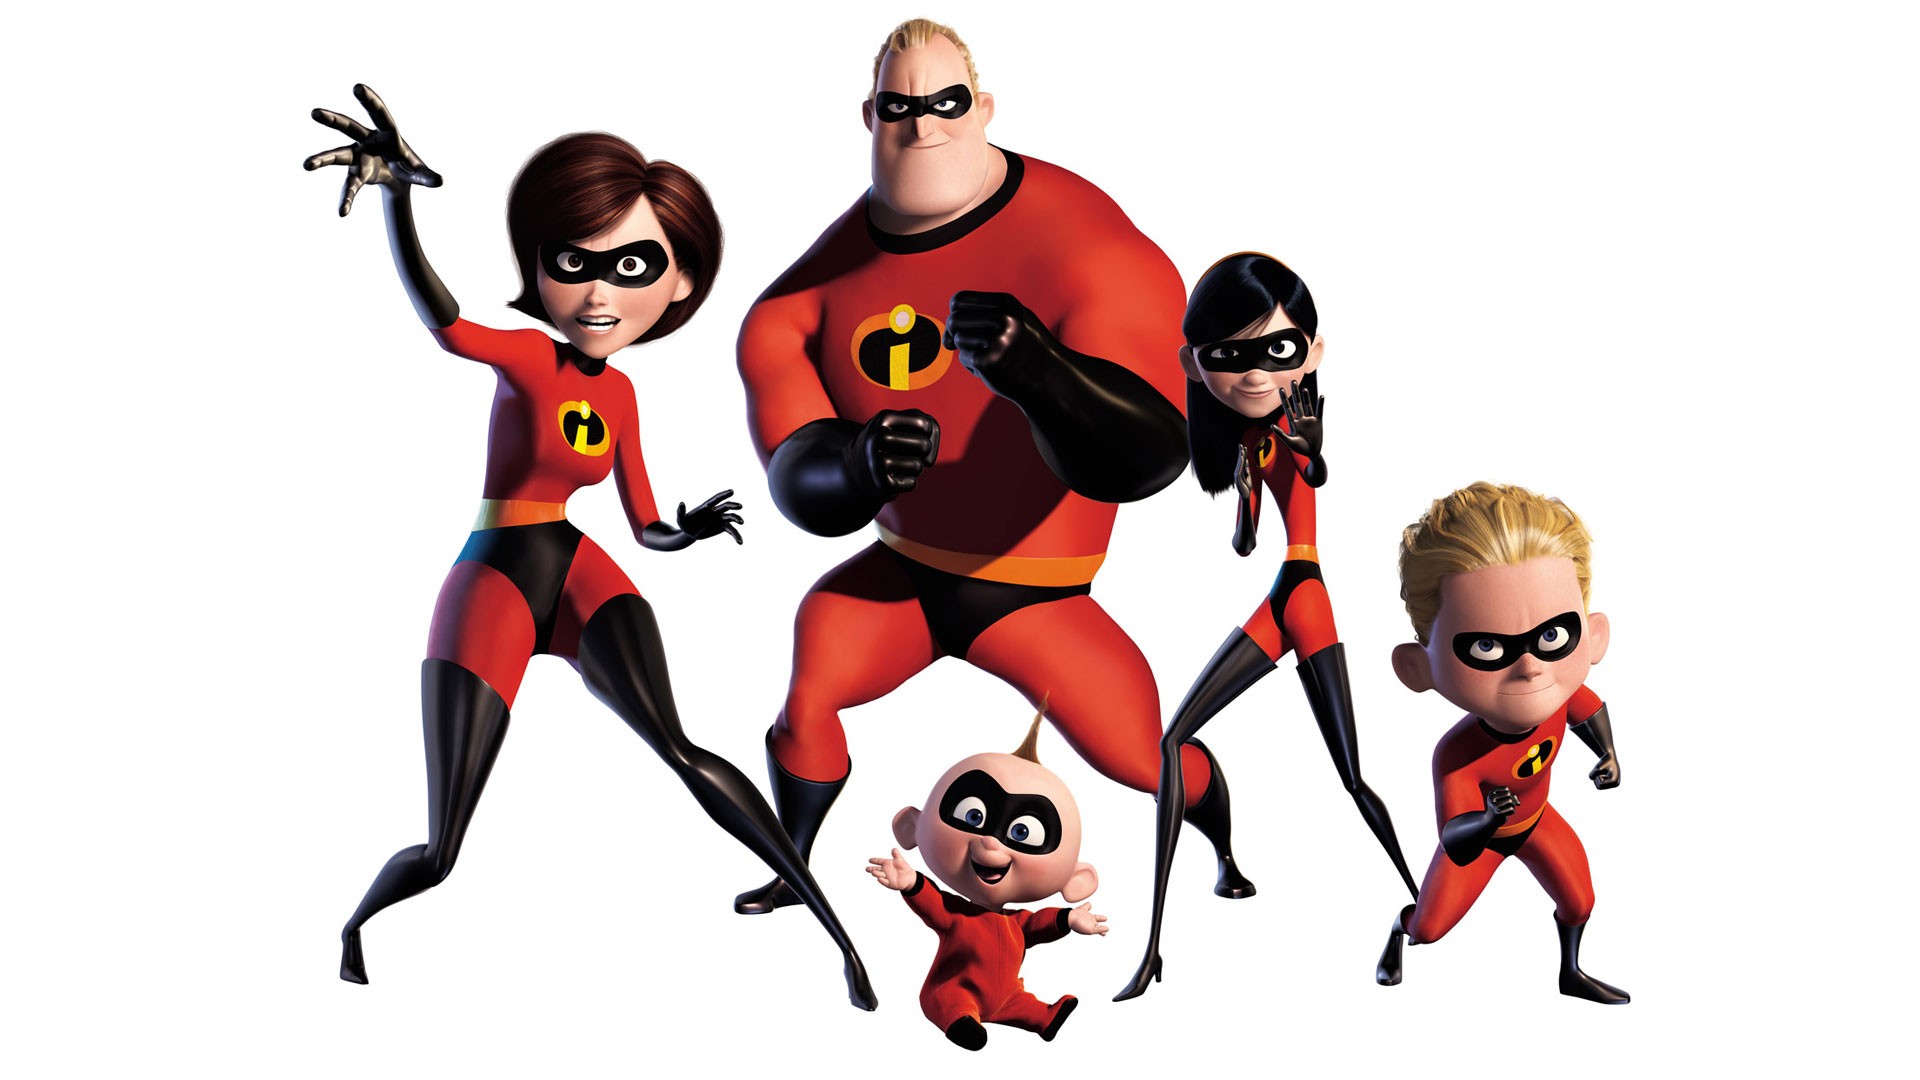 General 1920x1080 The Incredibles movies animated movies 2004 (Year)